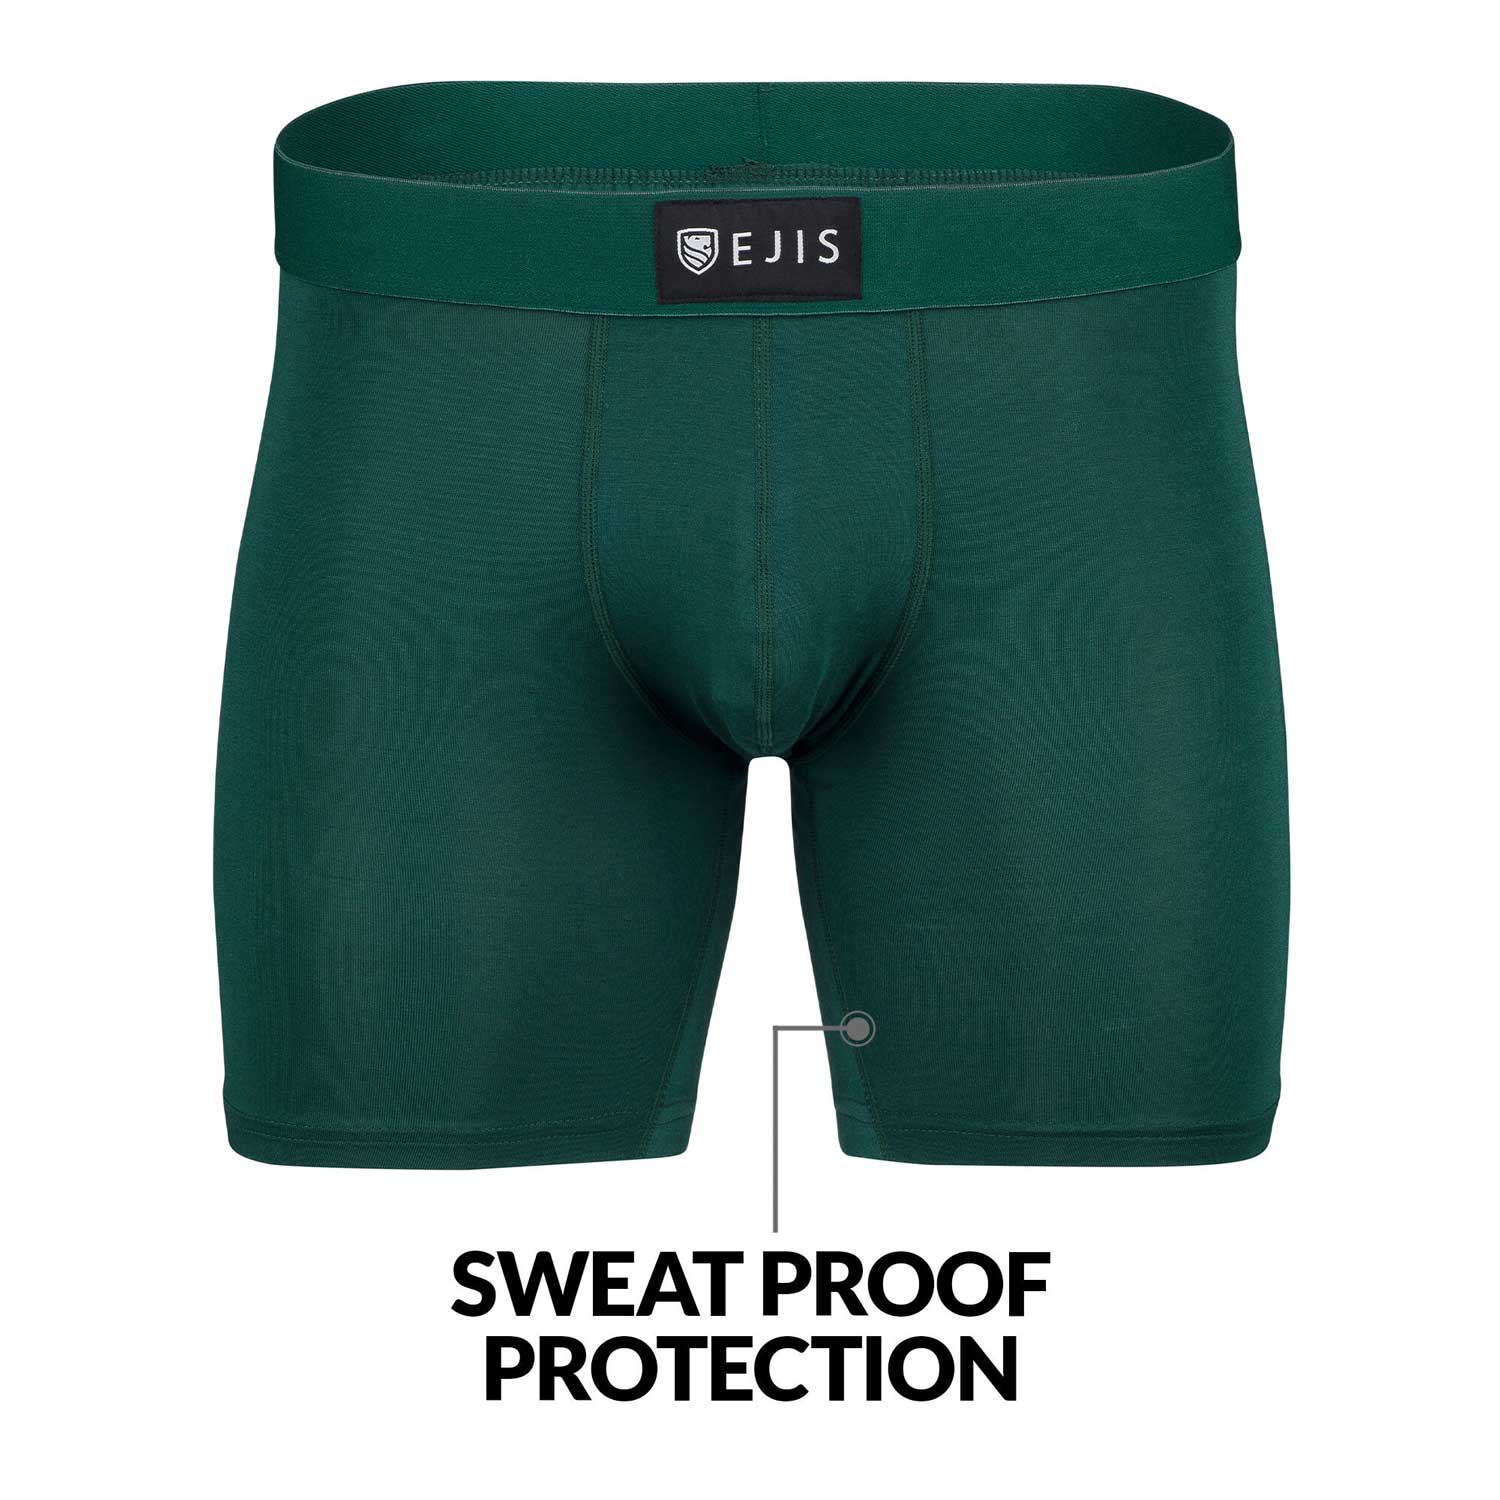 Pouch Sweat Proof Mens Boxer Briefs with Sweat Pads and Silver Treated to  Fight Odor– Ejis